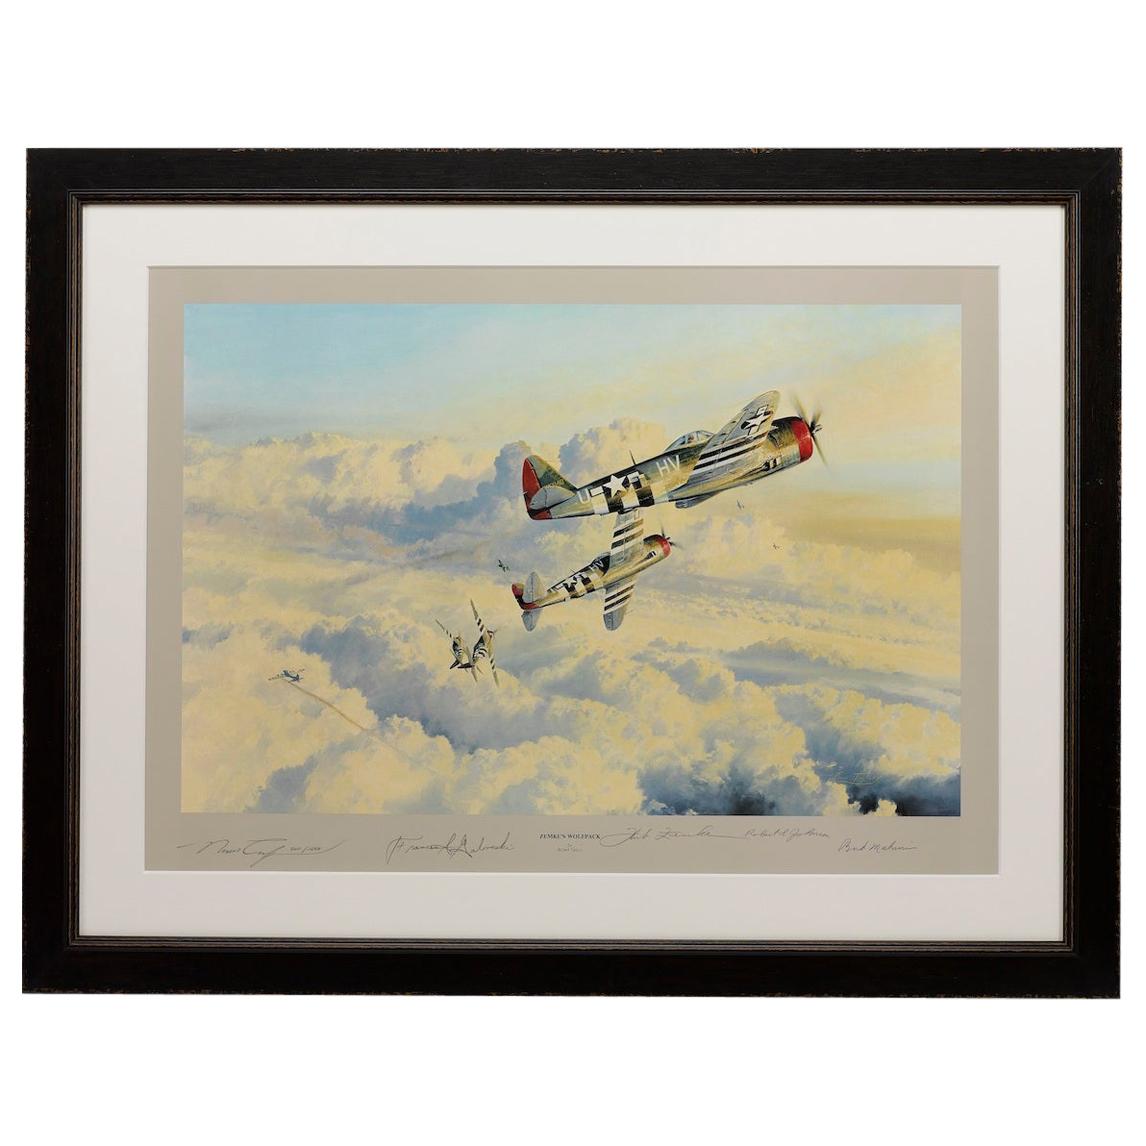 "Zemke's Wolfpack" by Robert Taylor Vintage Print, Autographed by the Pilots